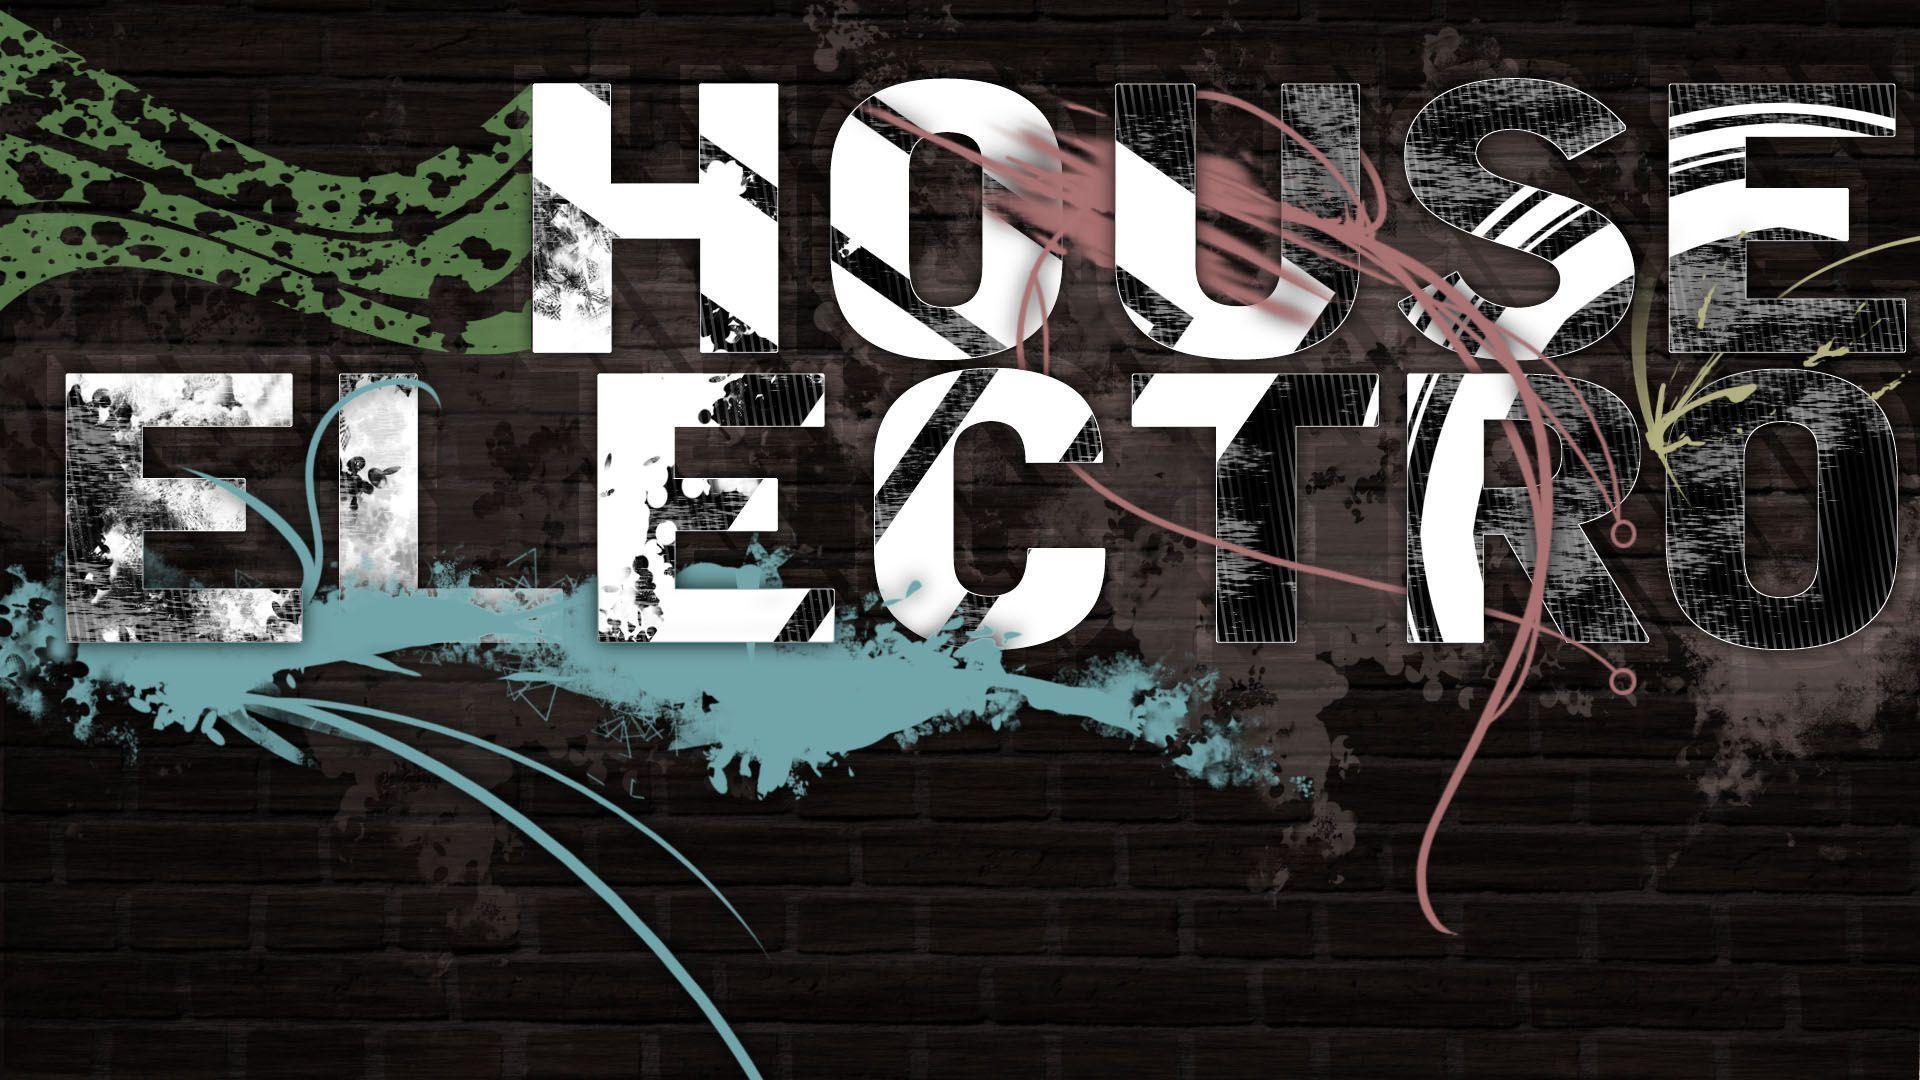 Electro House 2012 wallpapers